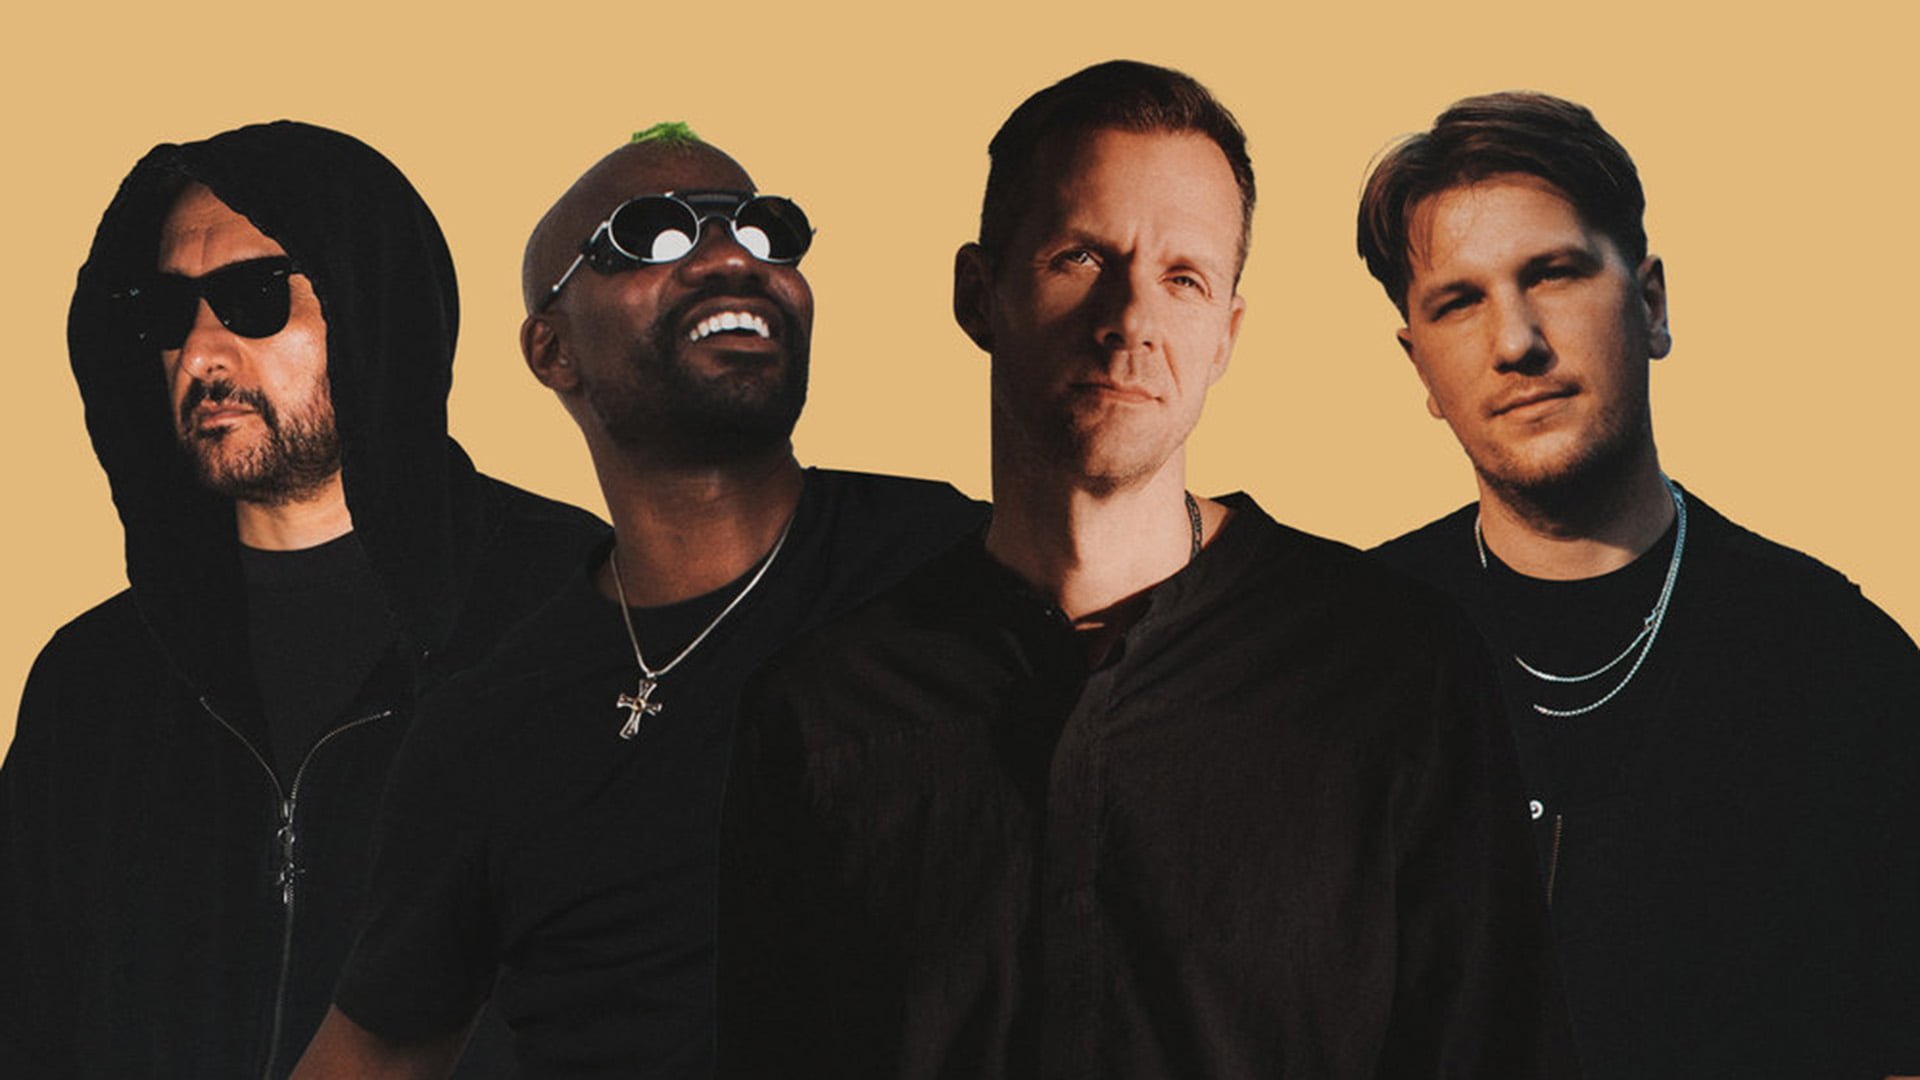 Adam Beyer, Layton Giordani and Green Velvet reimagined Sharam’s ‘Party All The Time’